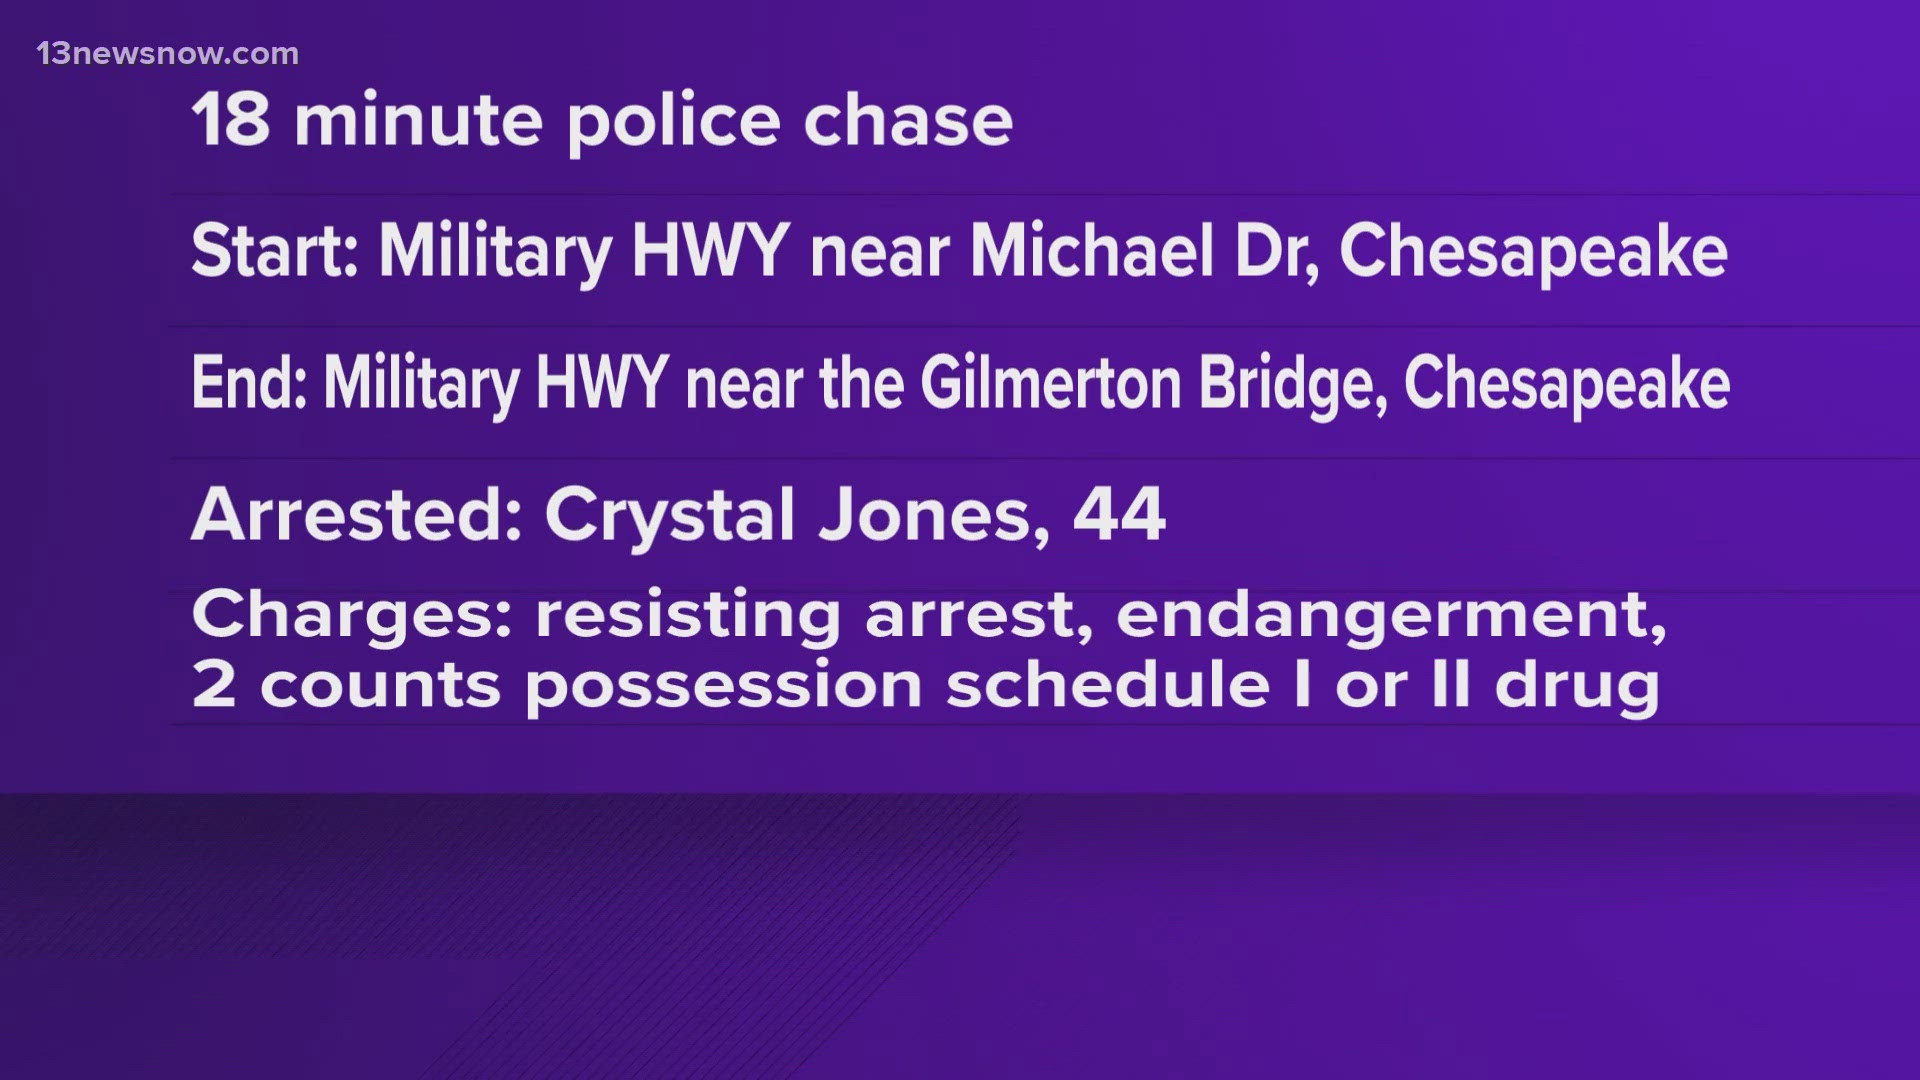 In Chesapeake, a woman is under arrest after leading police on a chase.